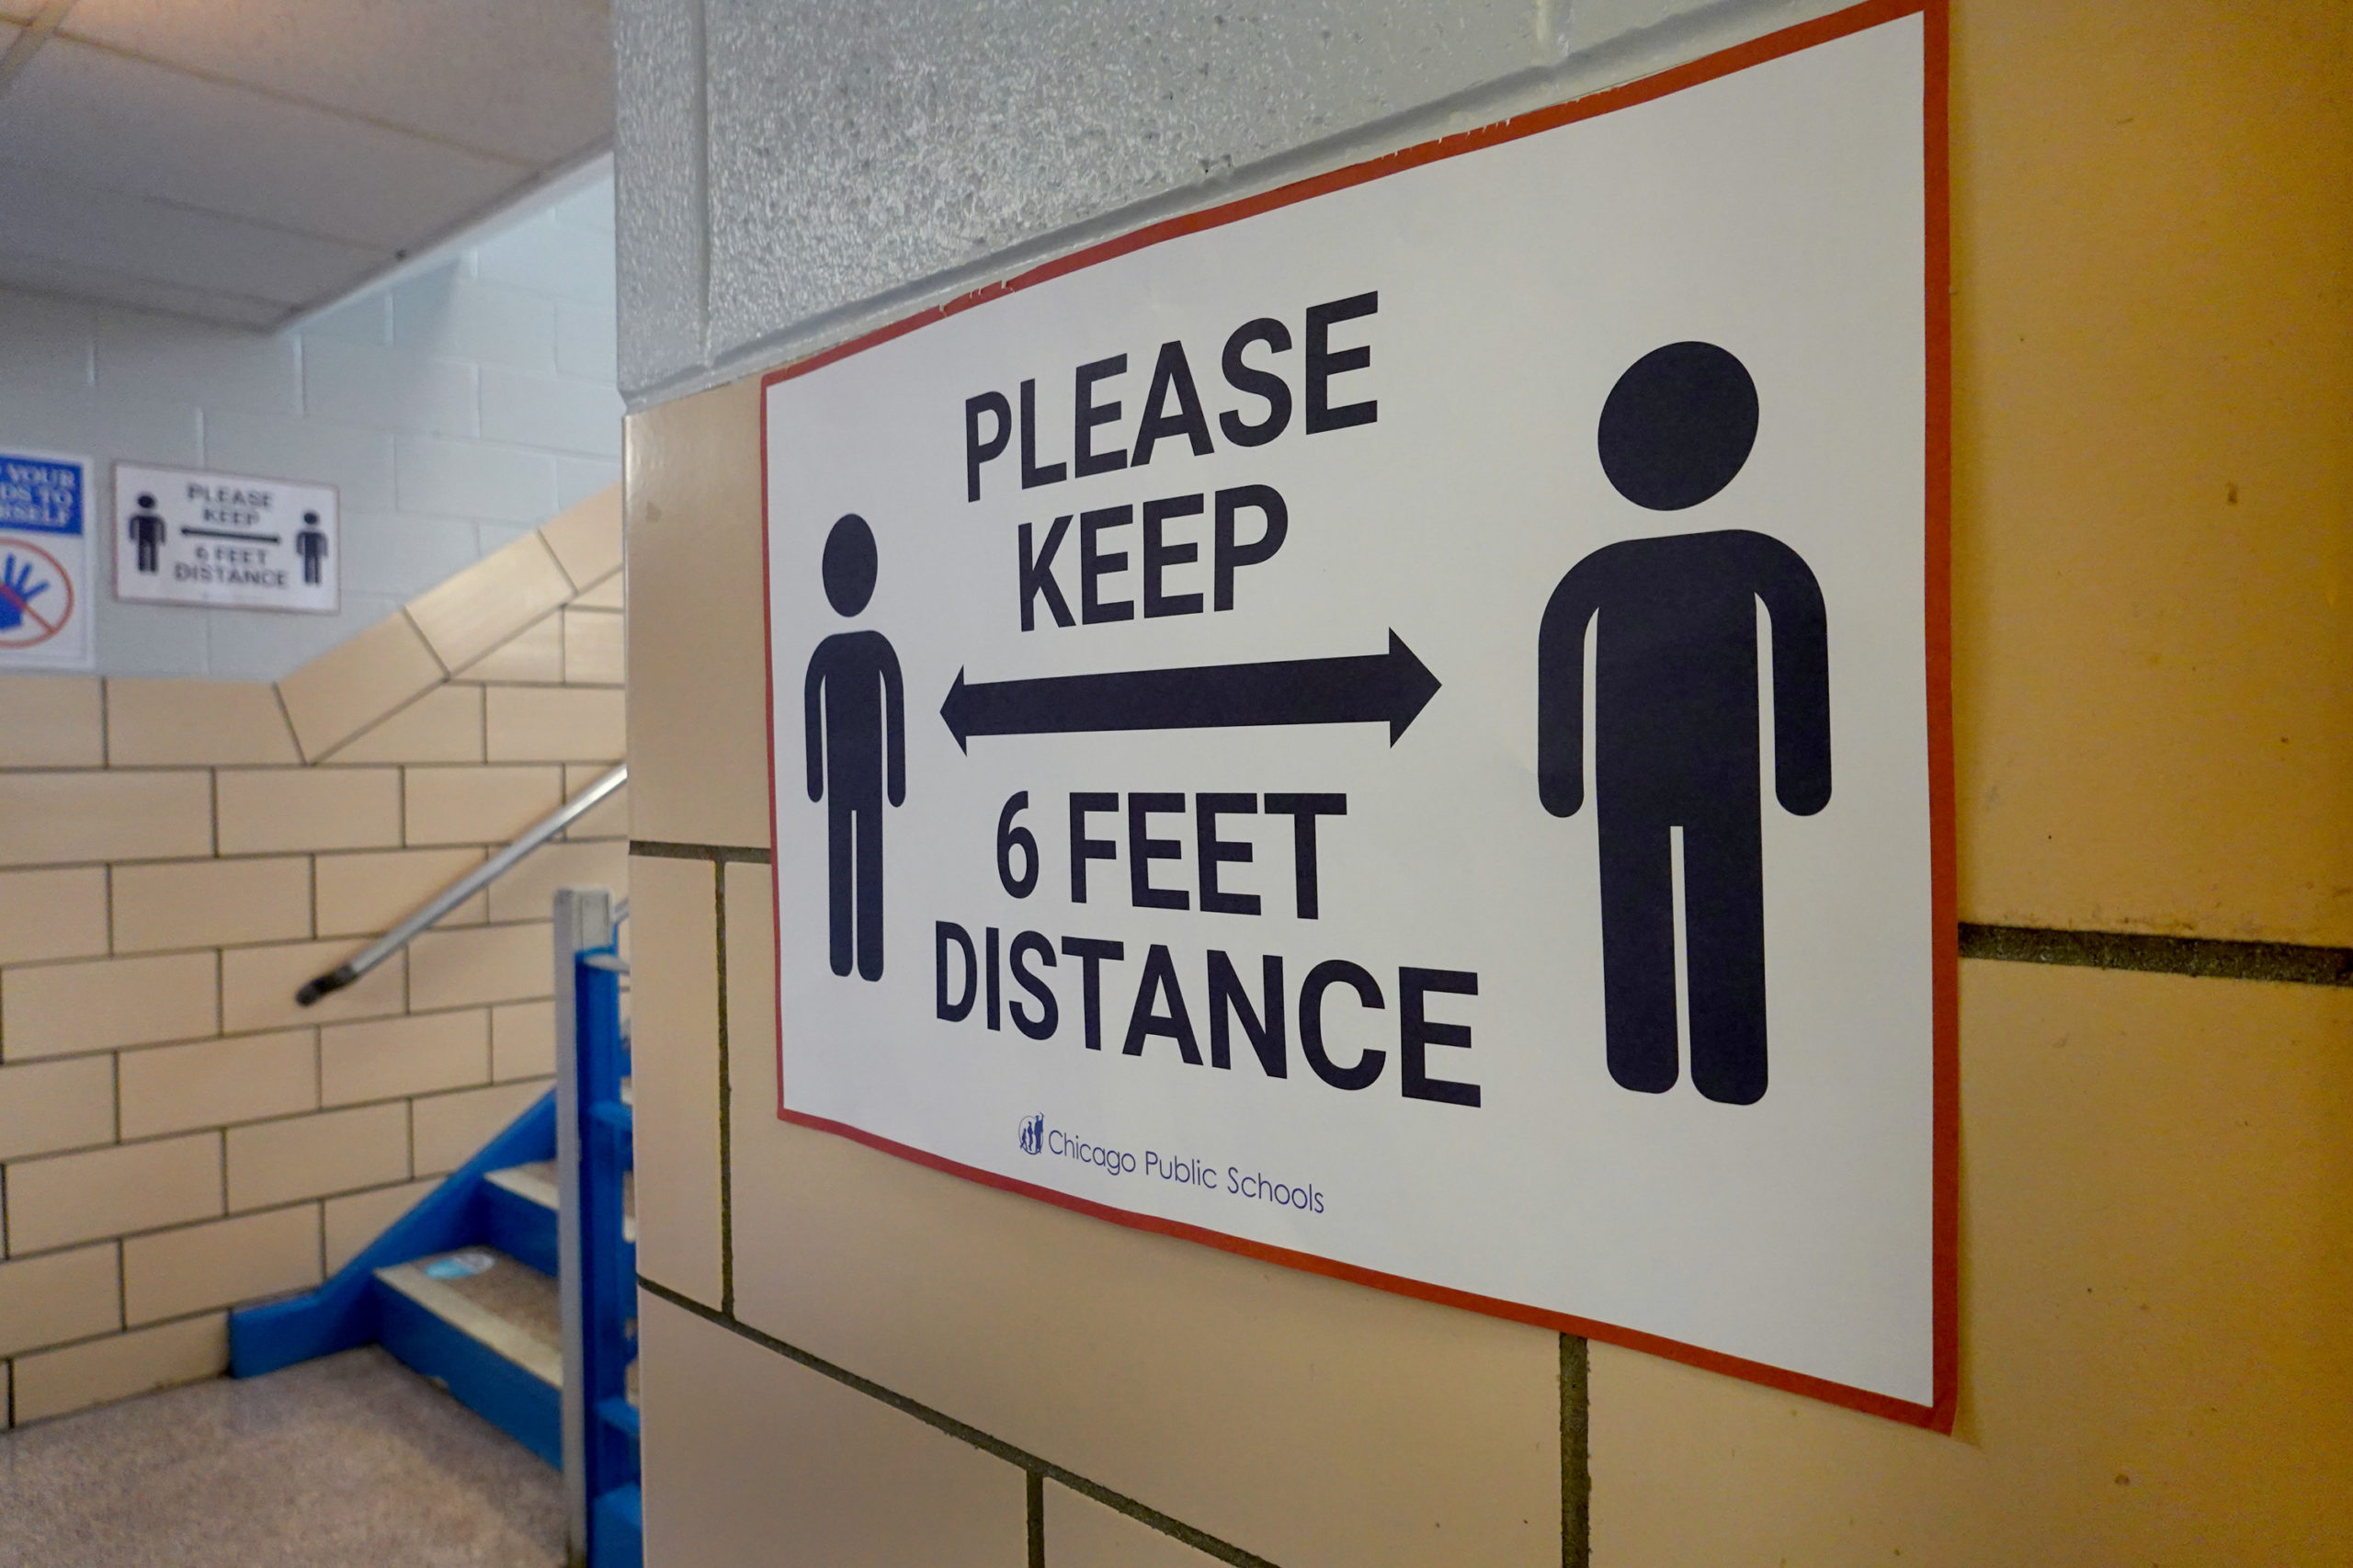 A sign in a hallway at King Elementary School in Chicago encourages social distancing as the school works to maintain a safe environment during the coronavirus pandemic. (Scott Olson/Getty Images)